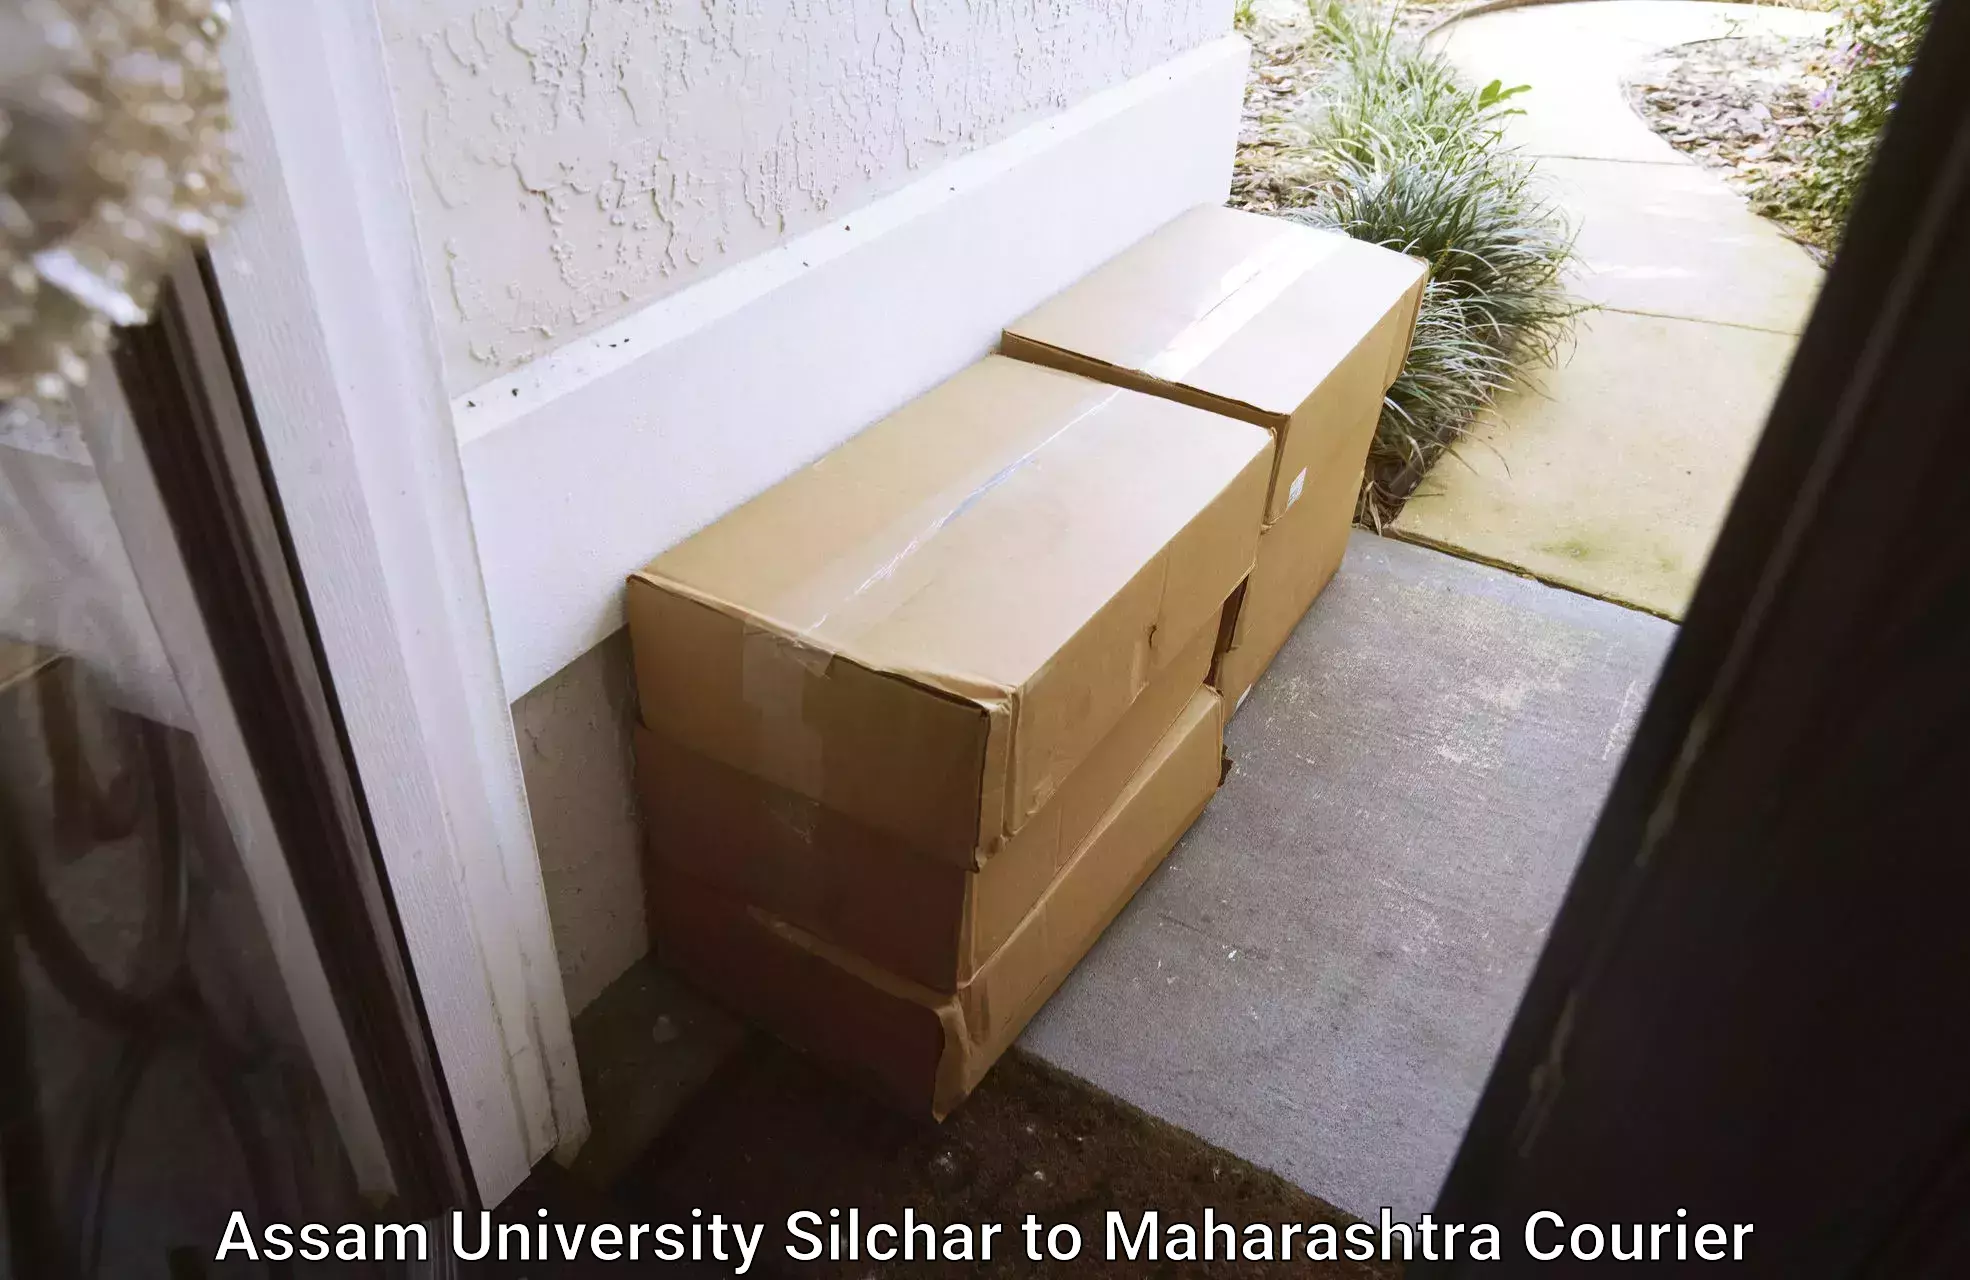 State-of-the-art courier technology Assam University Silchar to Chandwad